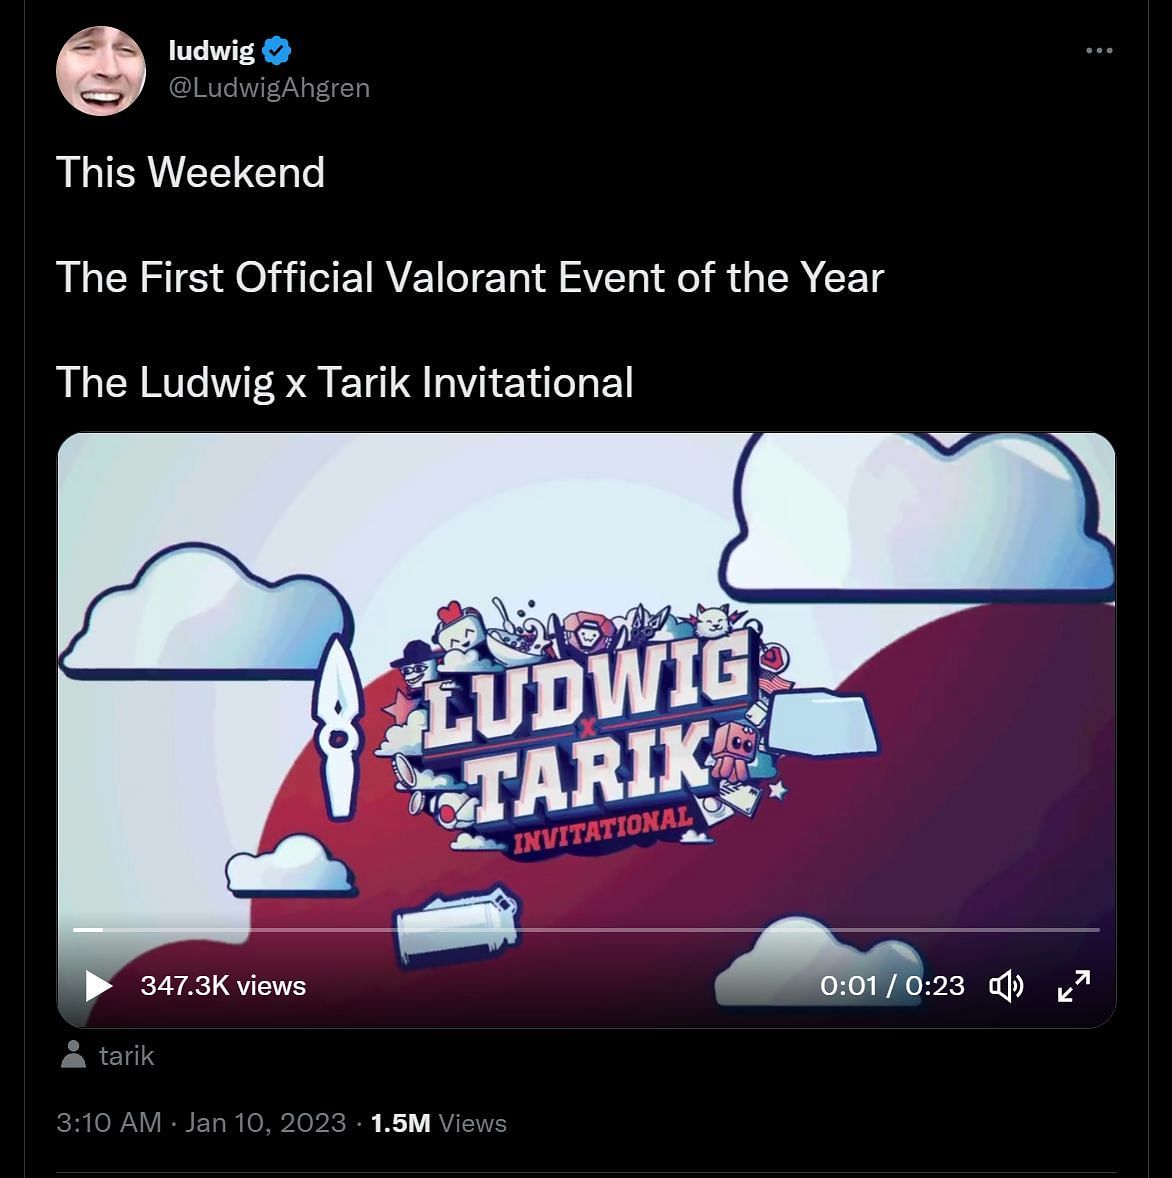 YouTube Gaming streamer announced the Valorant Invitationals on January 10, 2023 (Image via Twitter)